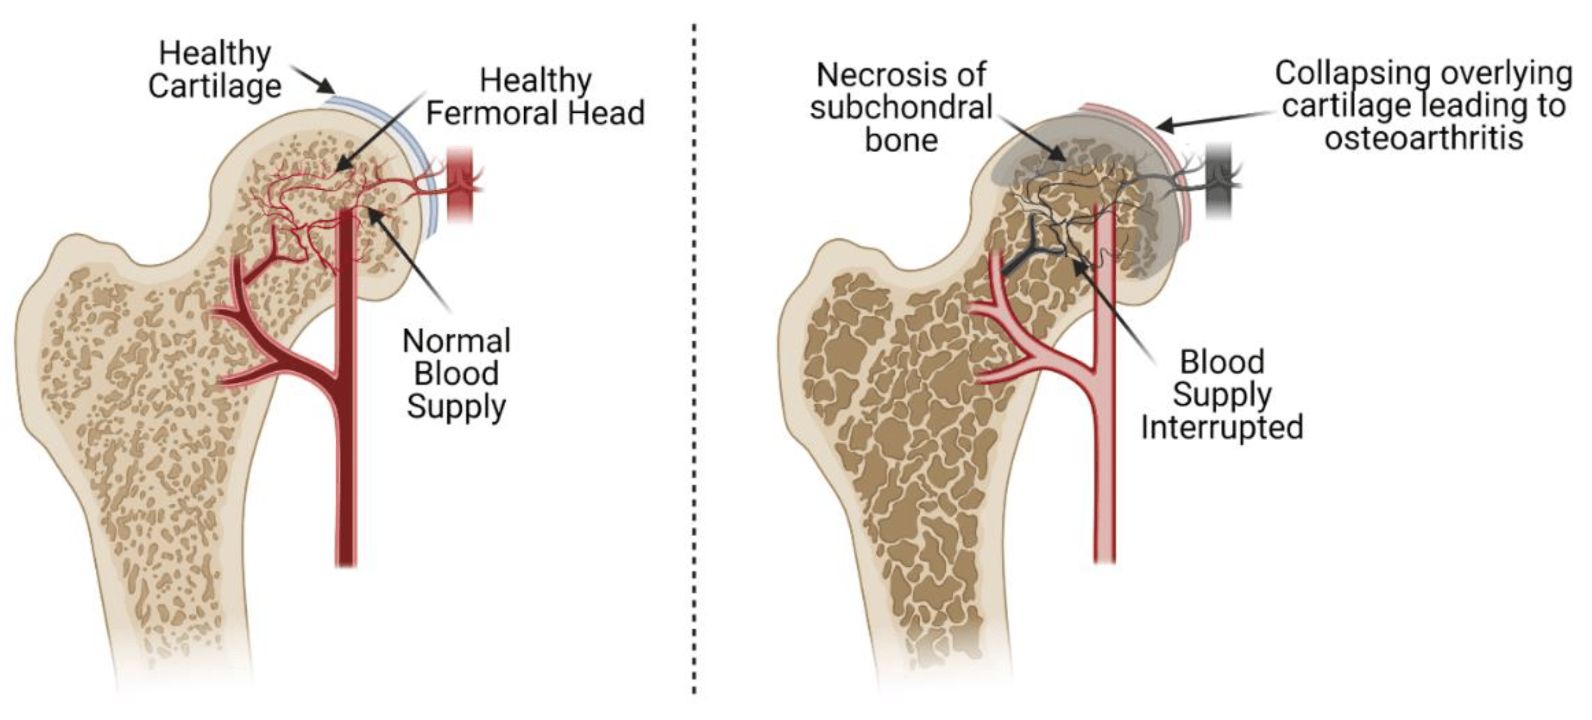 Surgery can be a solution for avascular nbirecrosis of the femoral head.